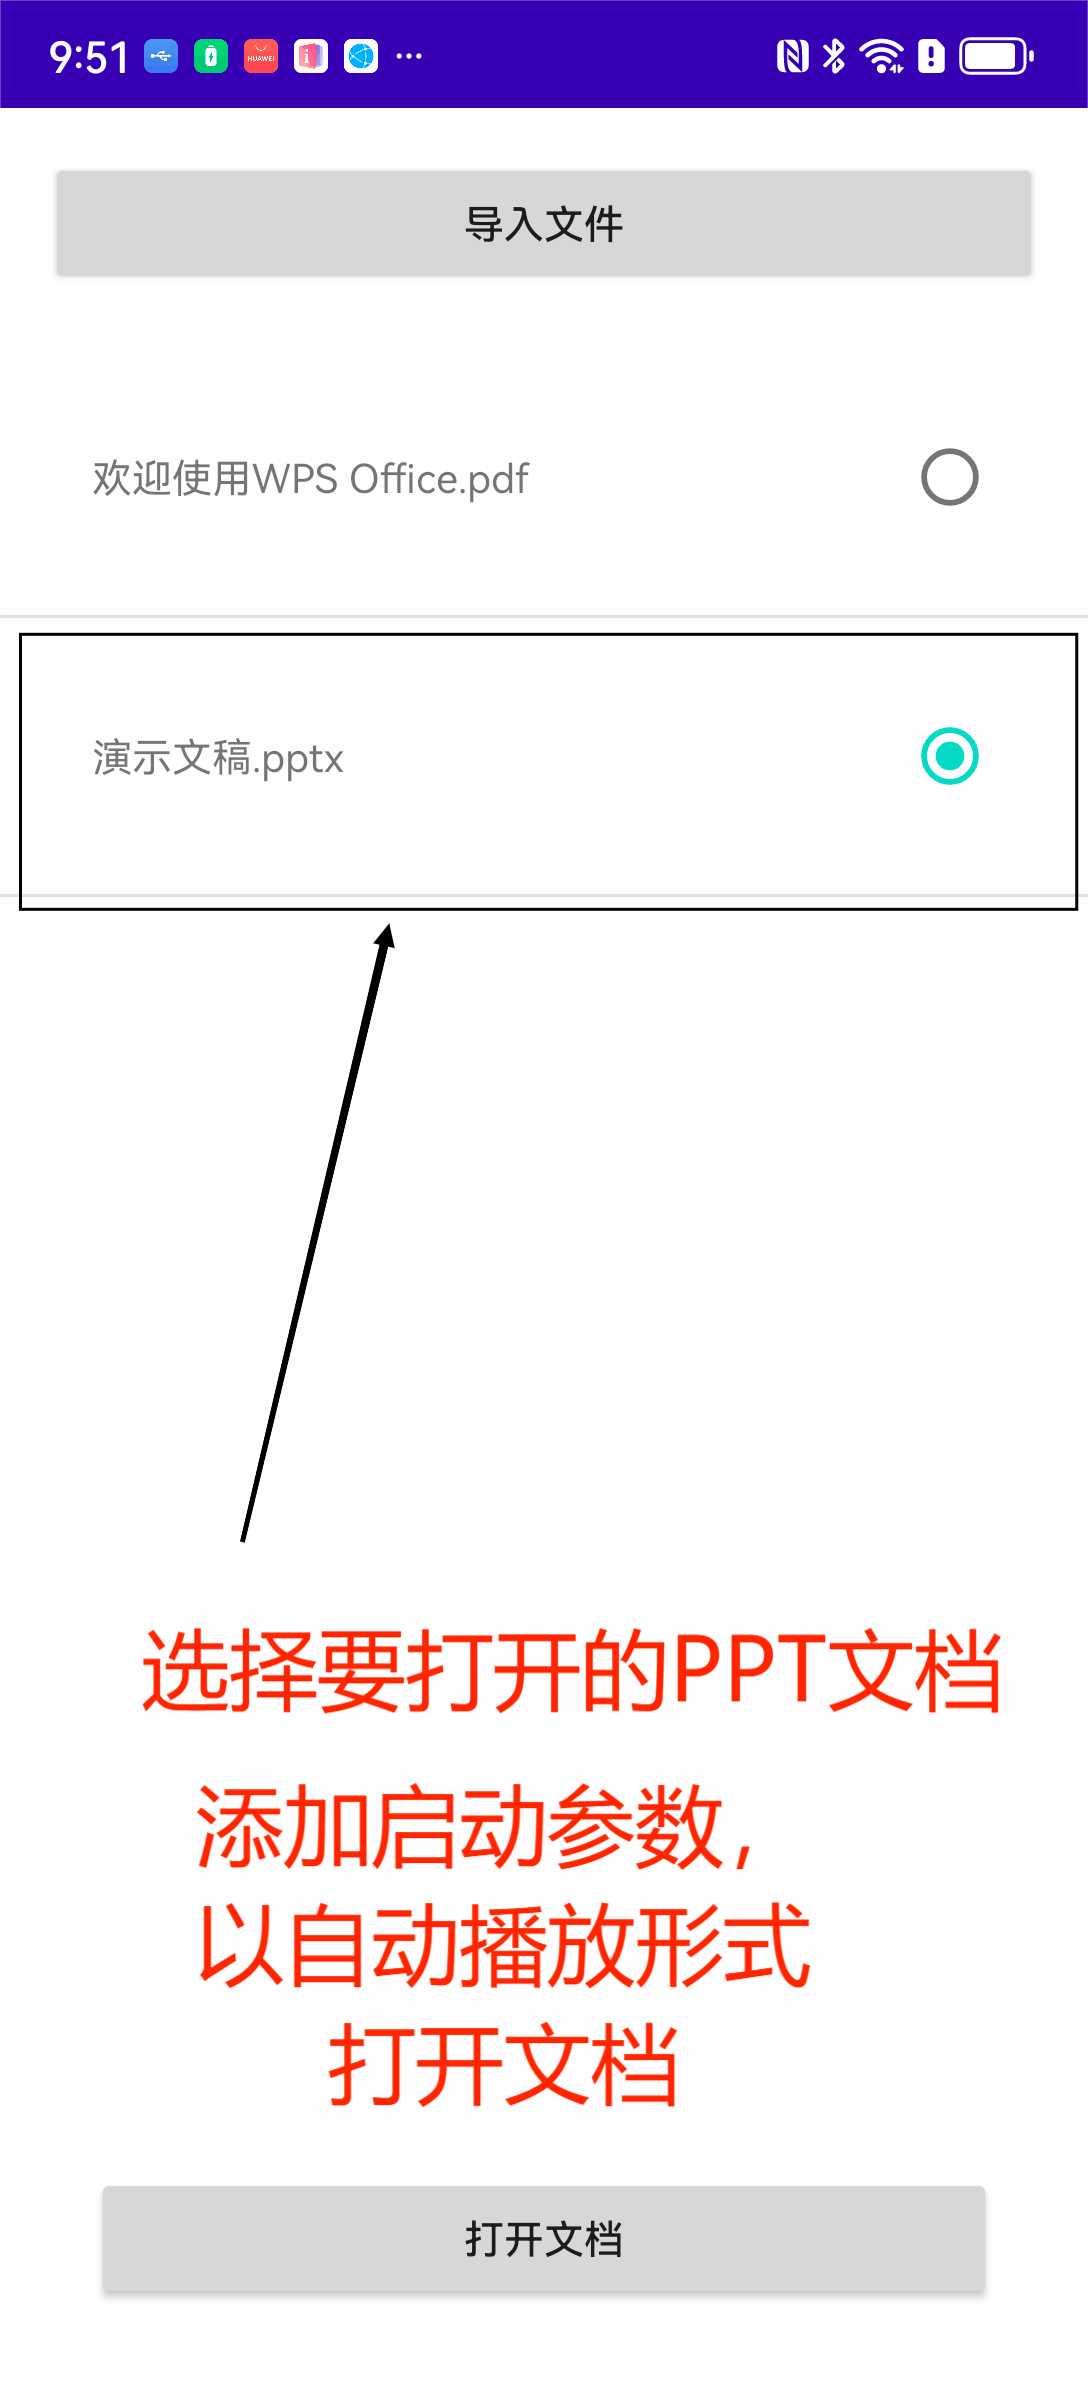 WPS二次<span style='color:red;'>开发</span>系列：以<span style='color:red;'>自动</span><span style='color:red;'>播放</span>模式打开<span style='color:red;'>PPT</span>文档